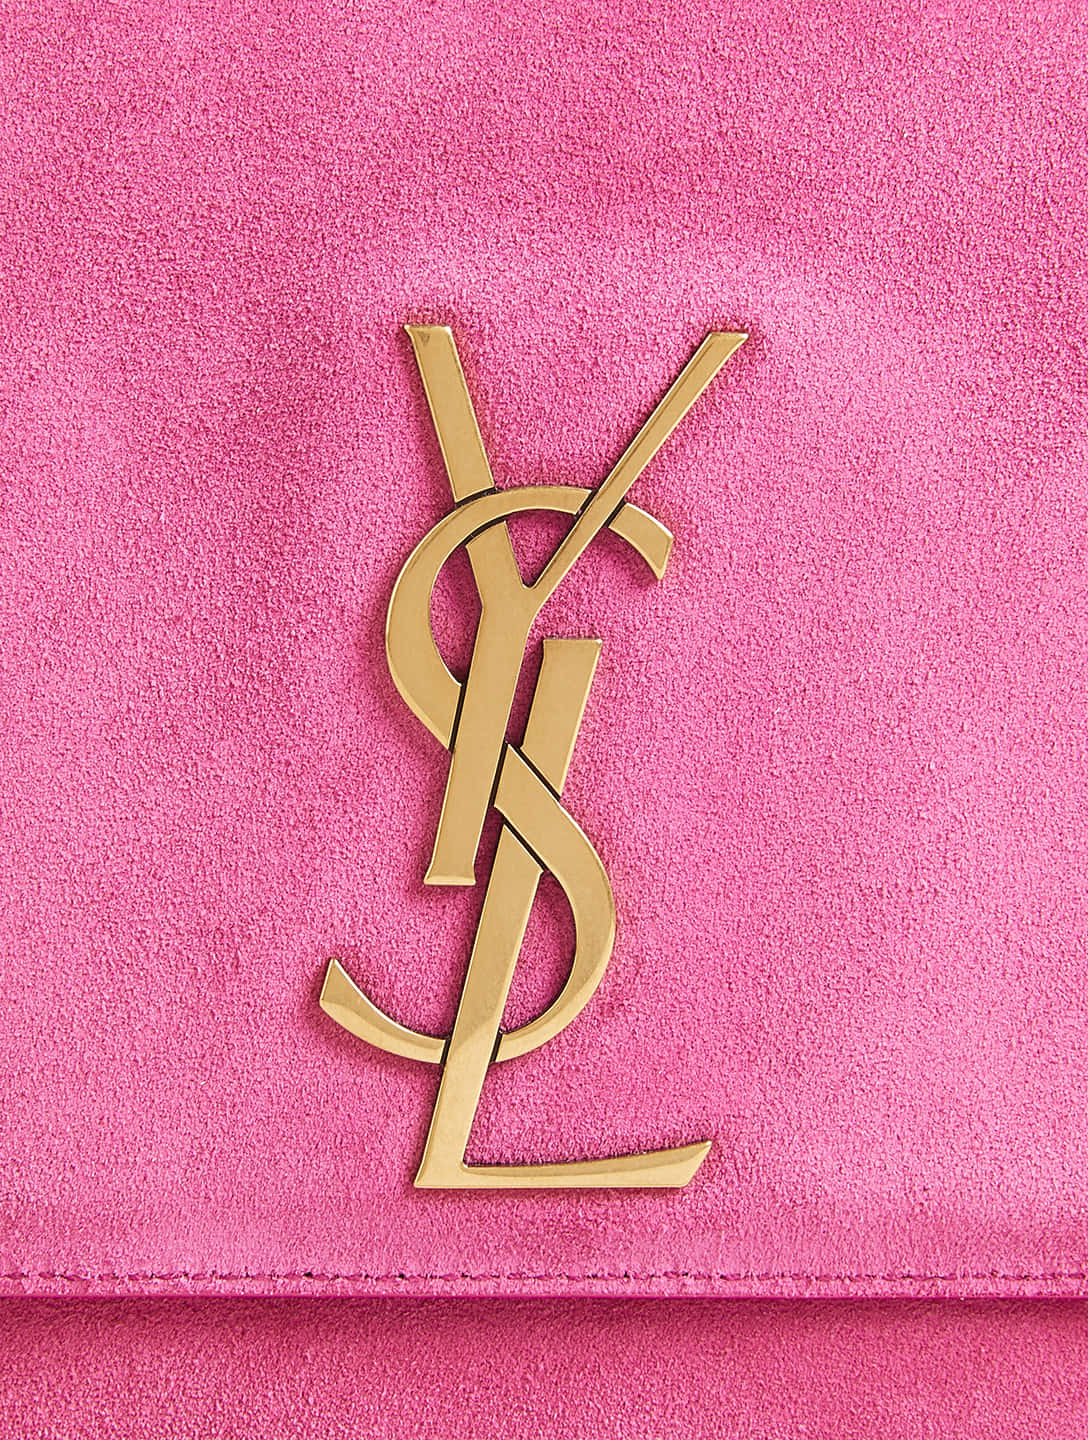 Download Yves Saint Laurent Ysl Saffiano Clutch Bag In Pink ...